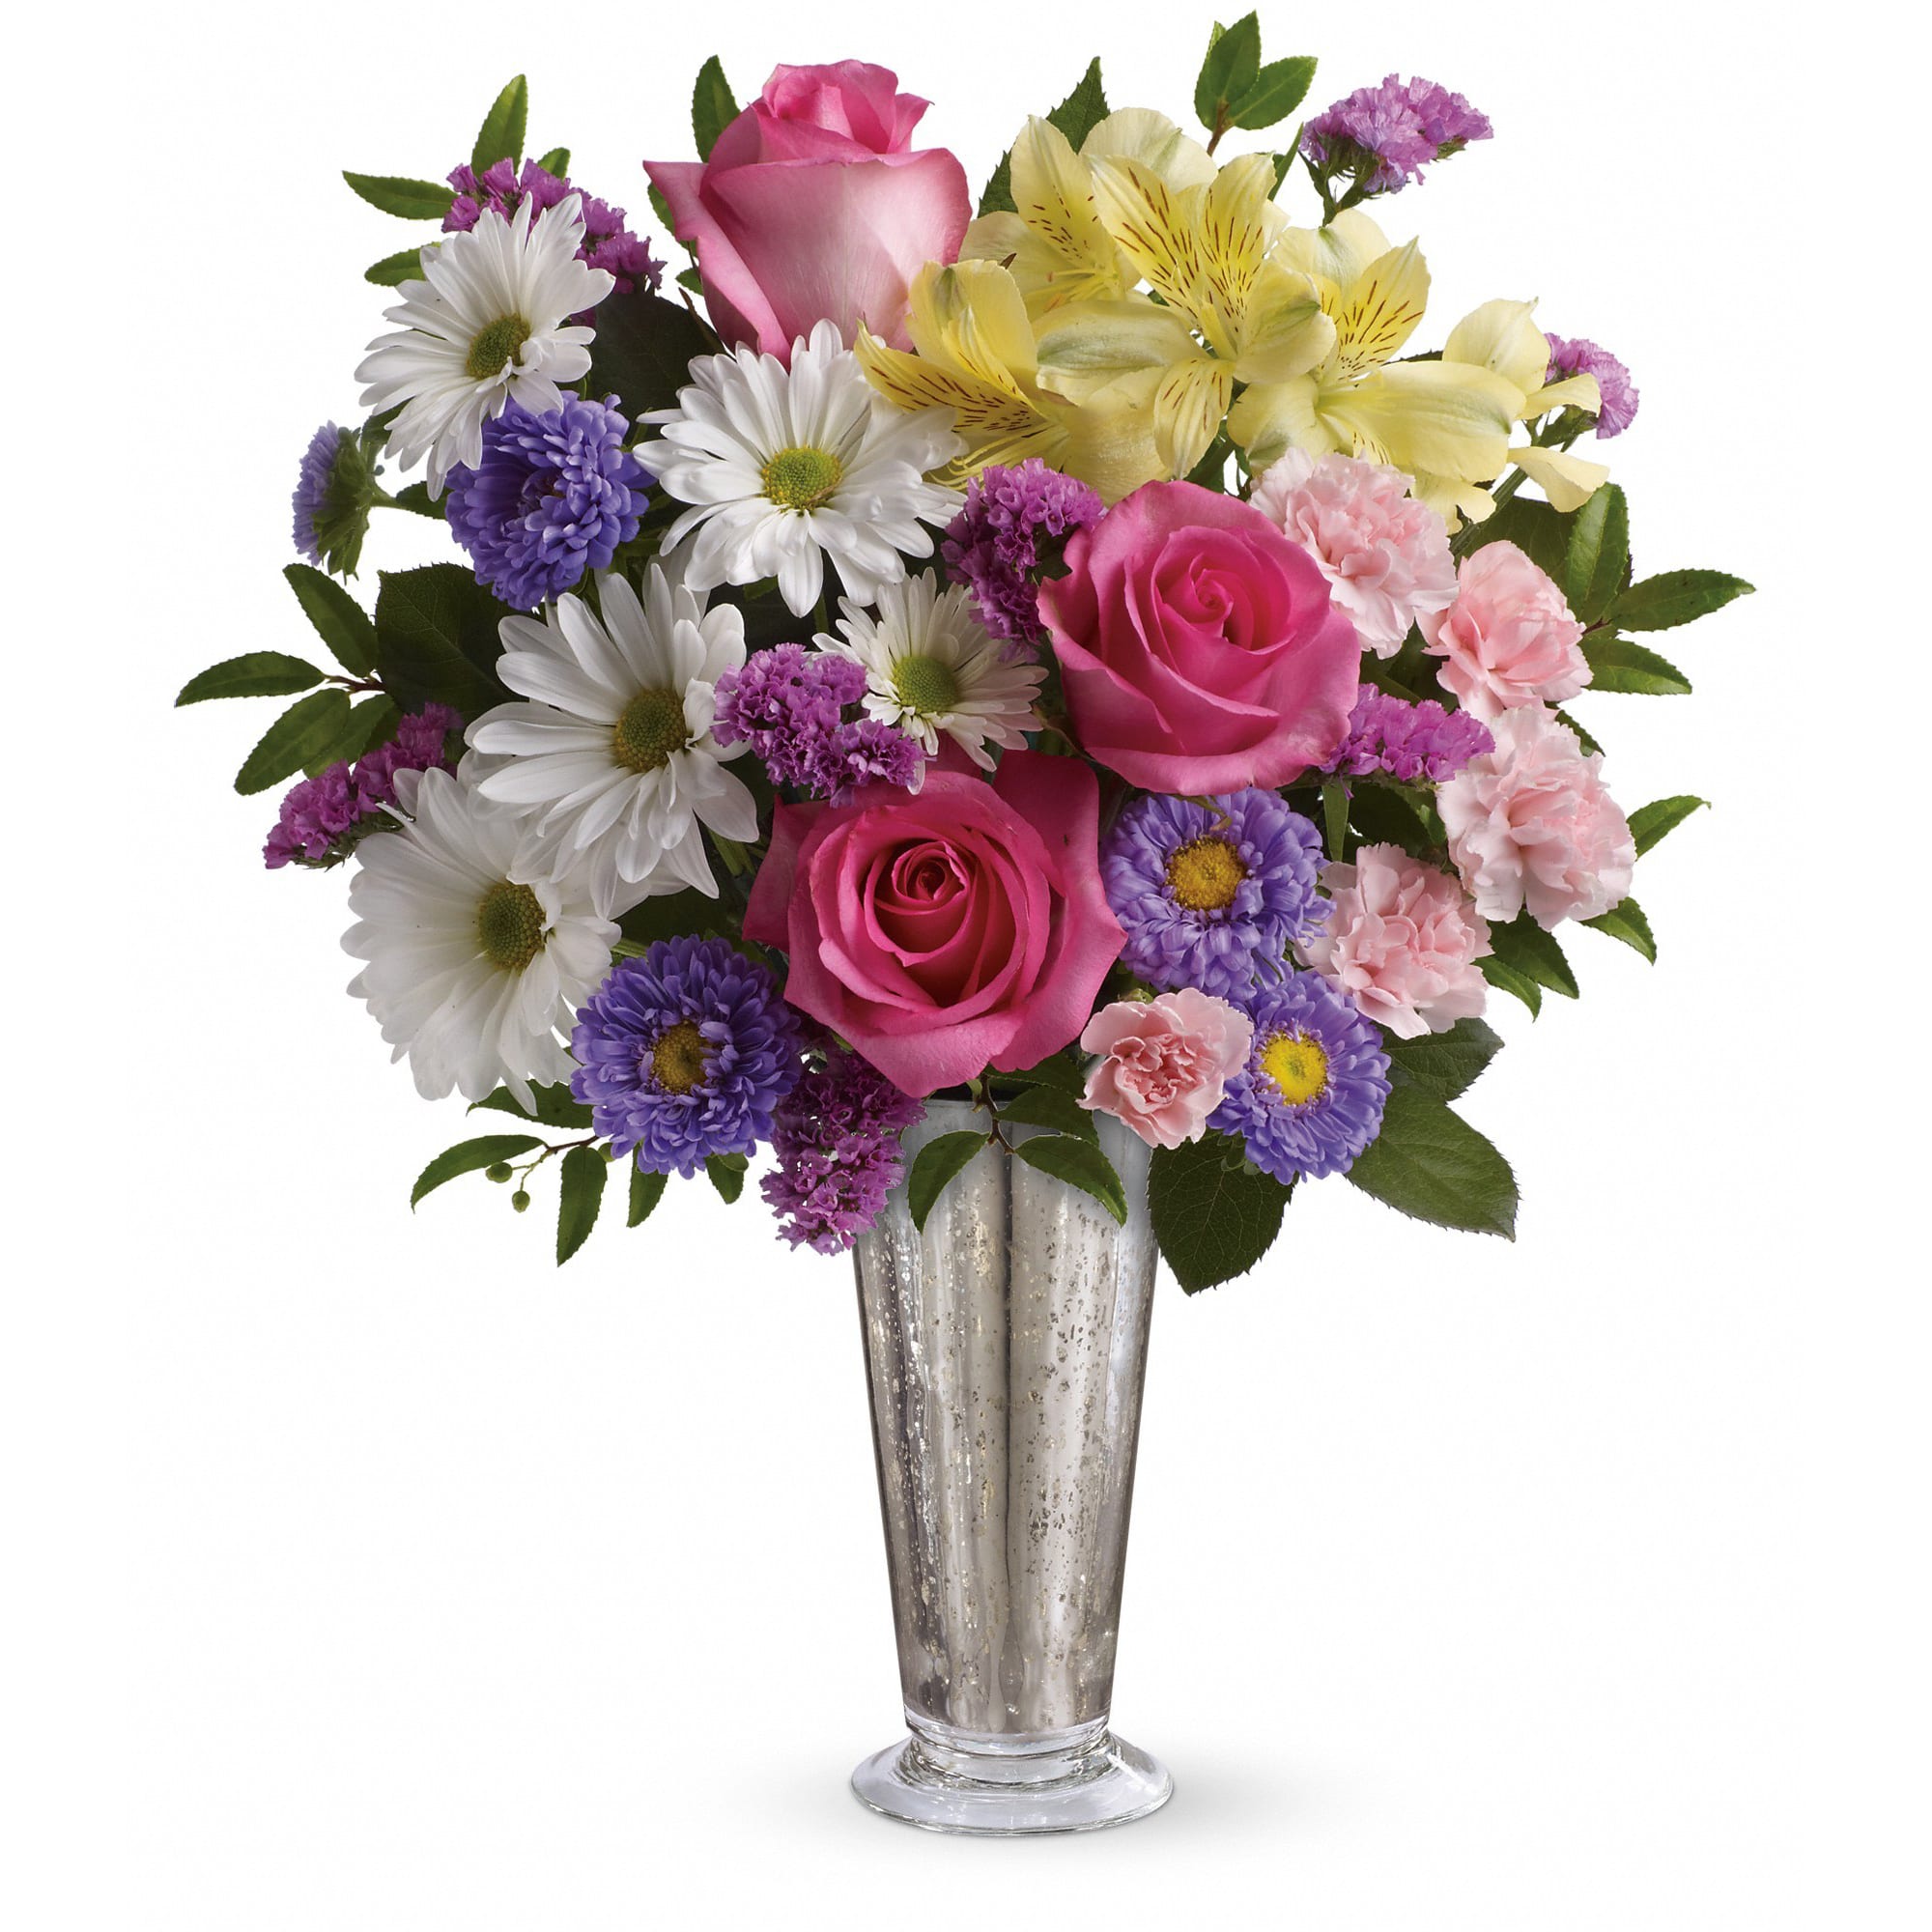 Smile and Shine Bouquet  - Send a shining smile to someone special with this bright bouquet! The happy mix of roses, alstroemeria and asters are presented in a popular mercury glass vase - a glittering gift for now and forever.